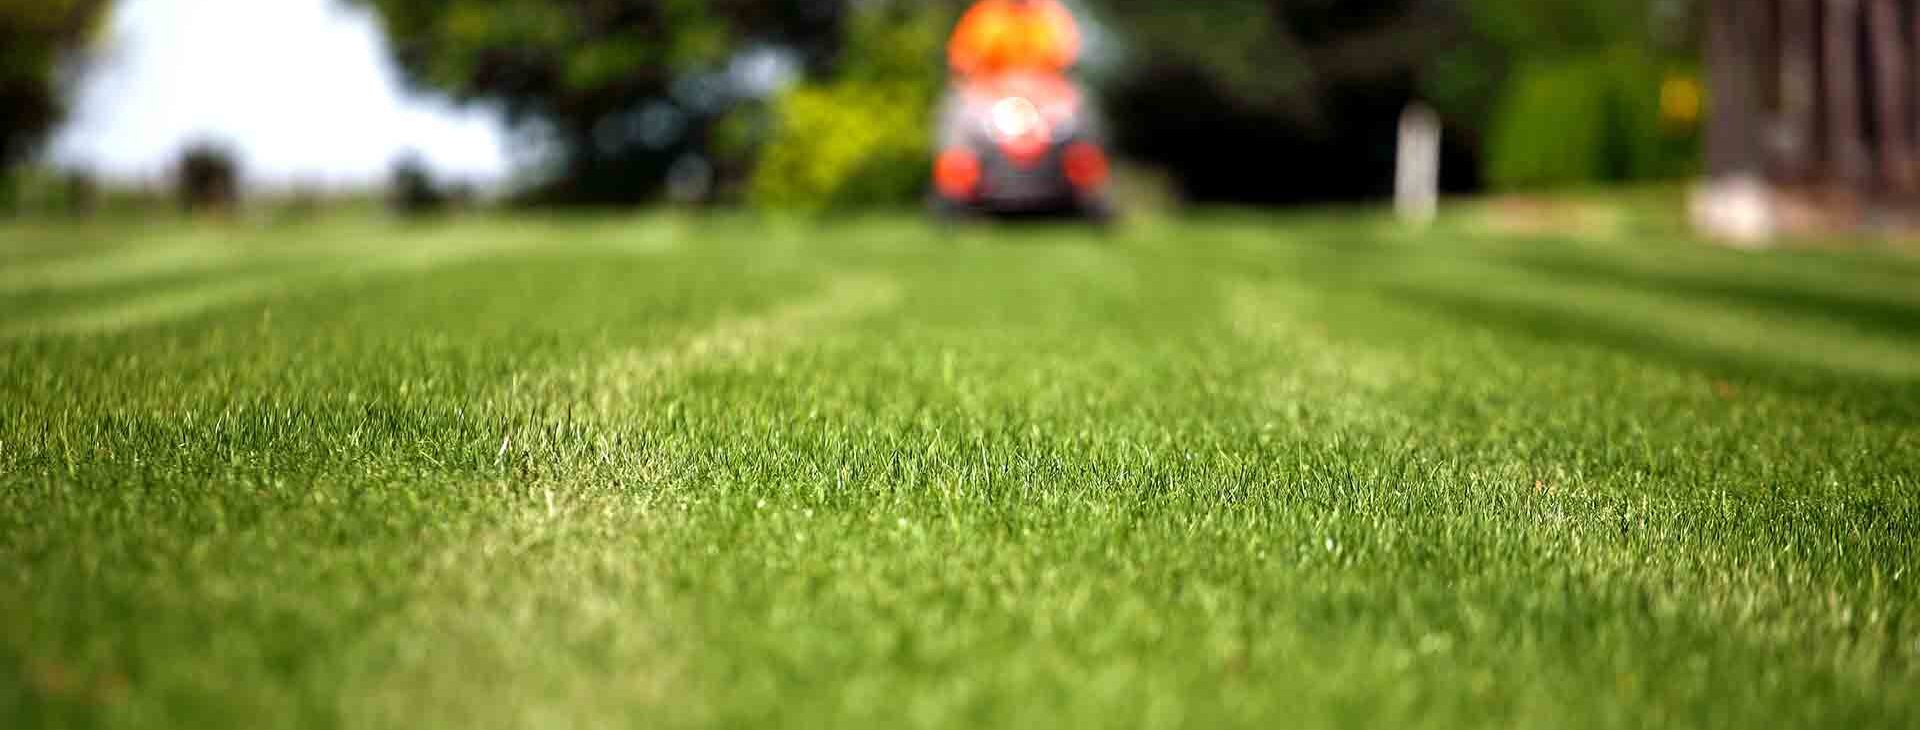 Your lawn and landscape<br />
the way that it should